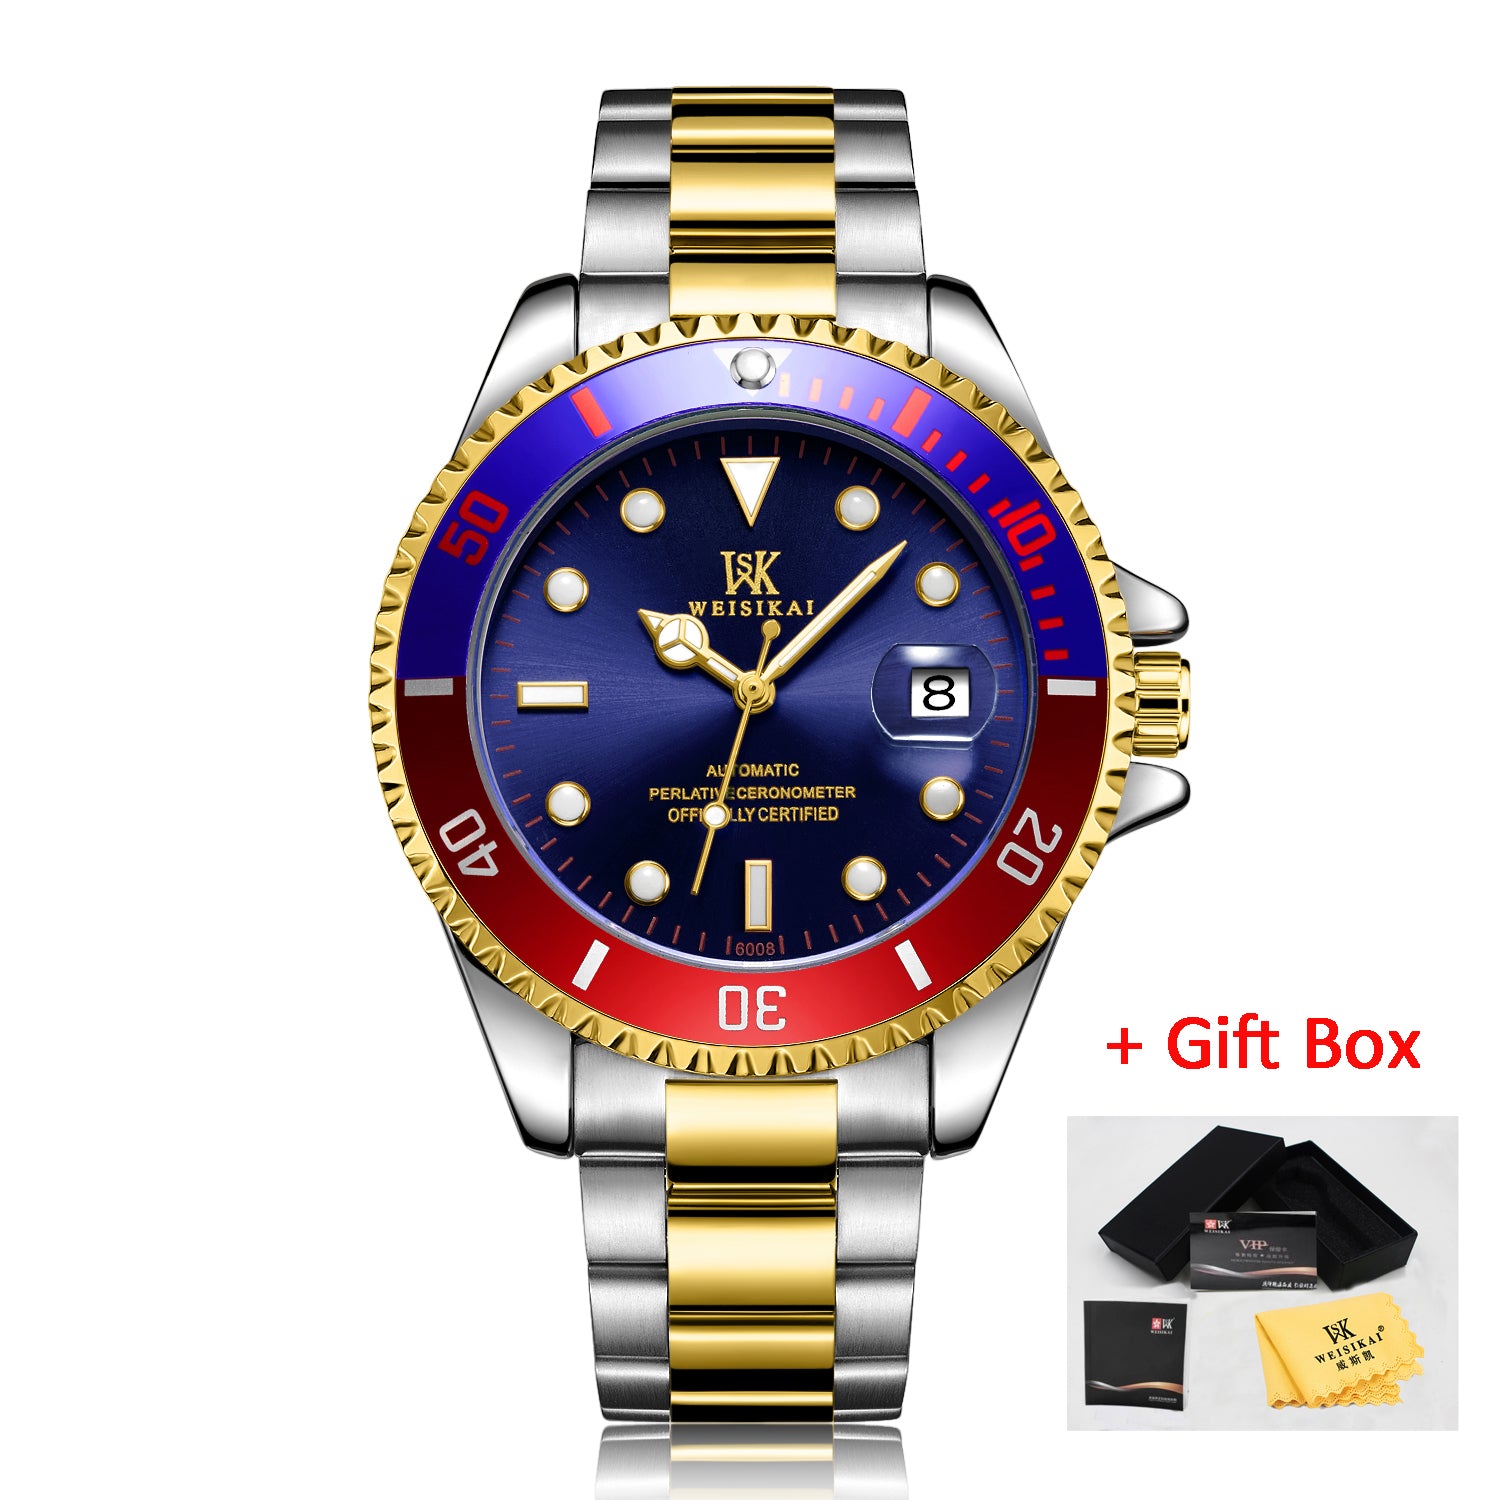 WEISIKAI Diver Watch Automatic Mechanical Watches Sports Top Brand Luxury Men's Diving Watches Male Wristwatch Relogio Masculino